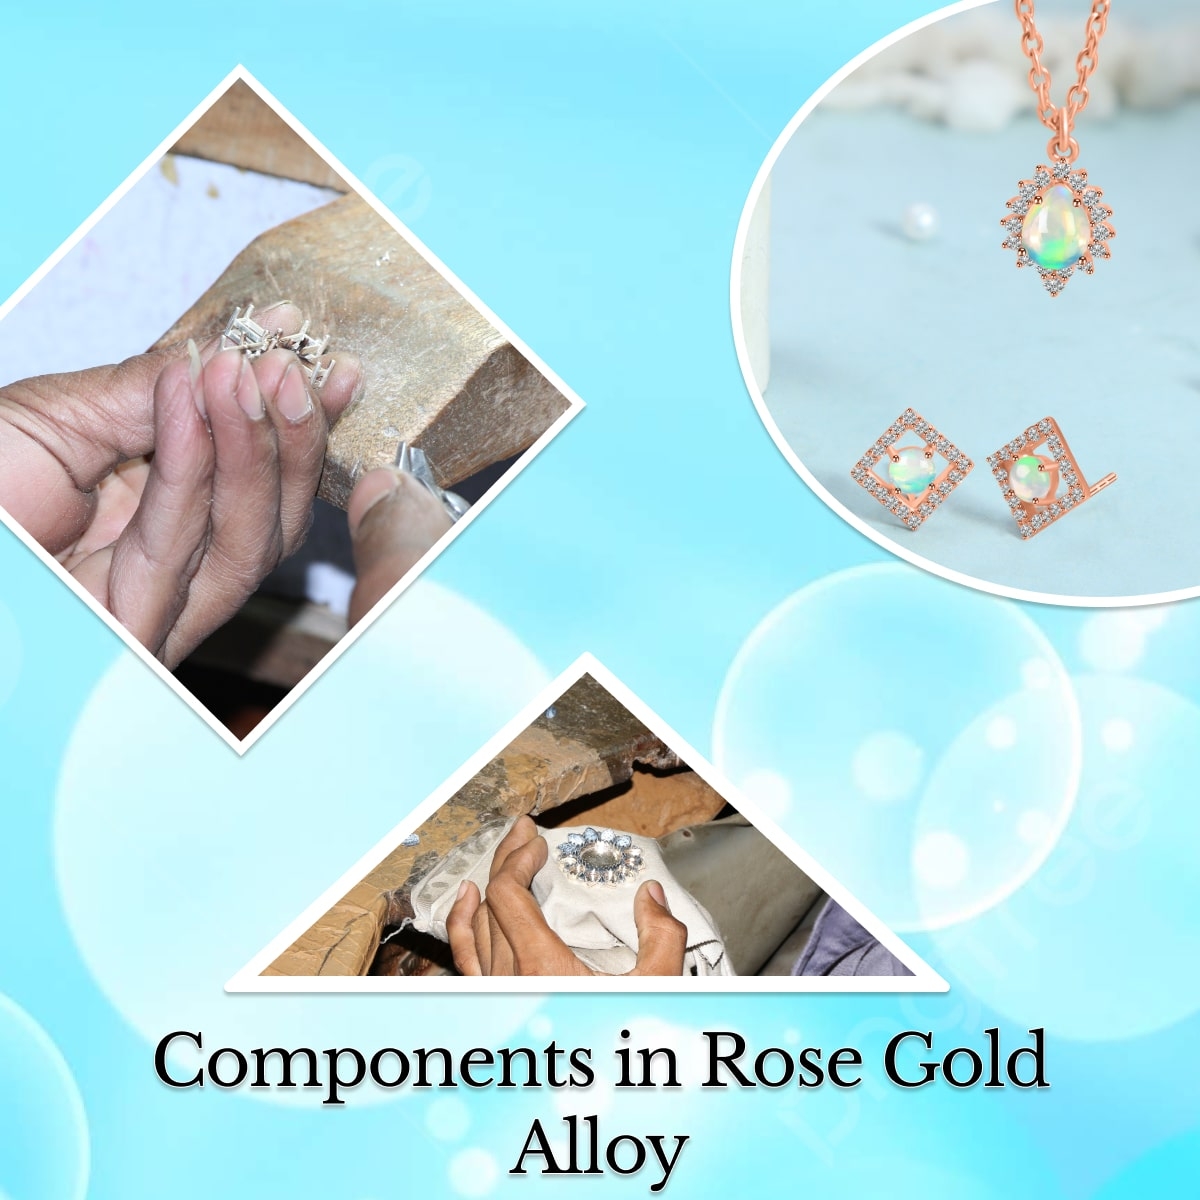 What is Rose Gold Actually Made Of?